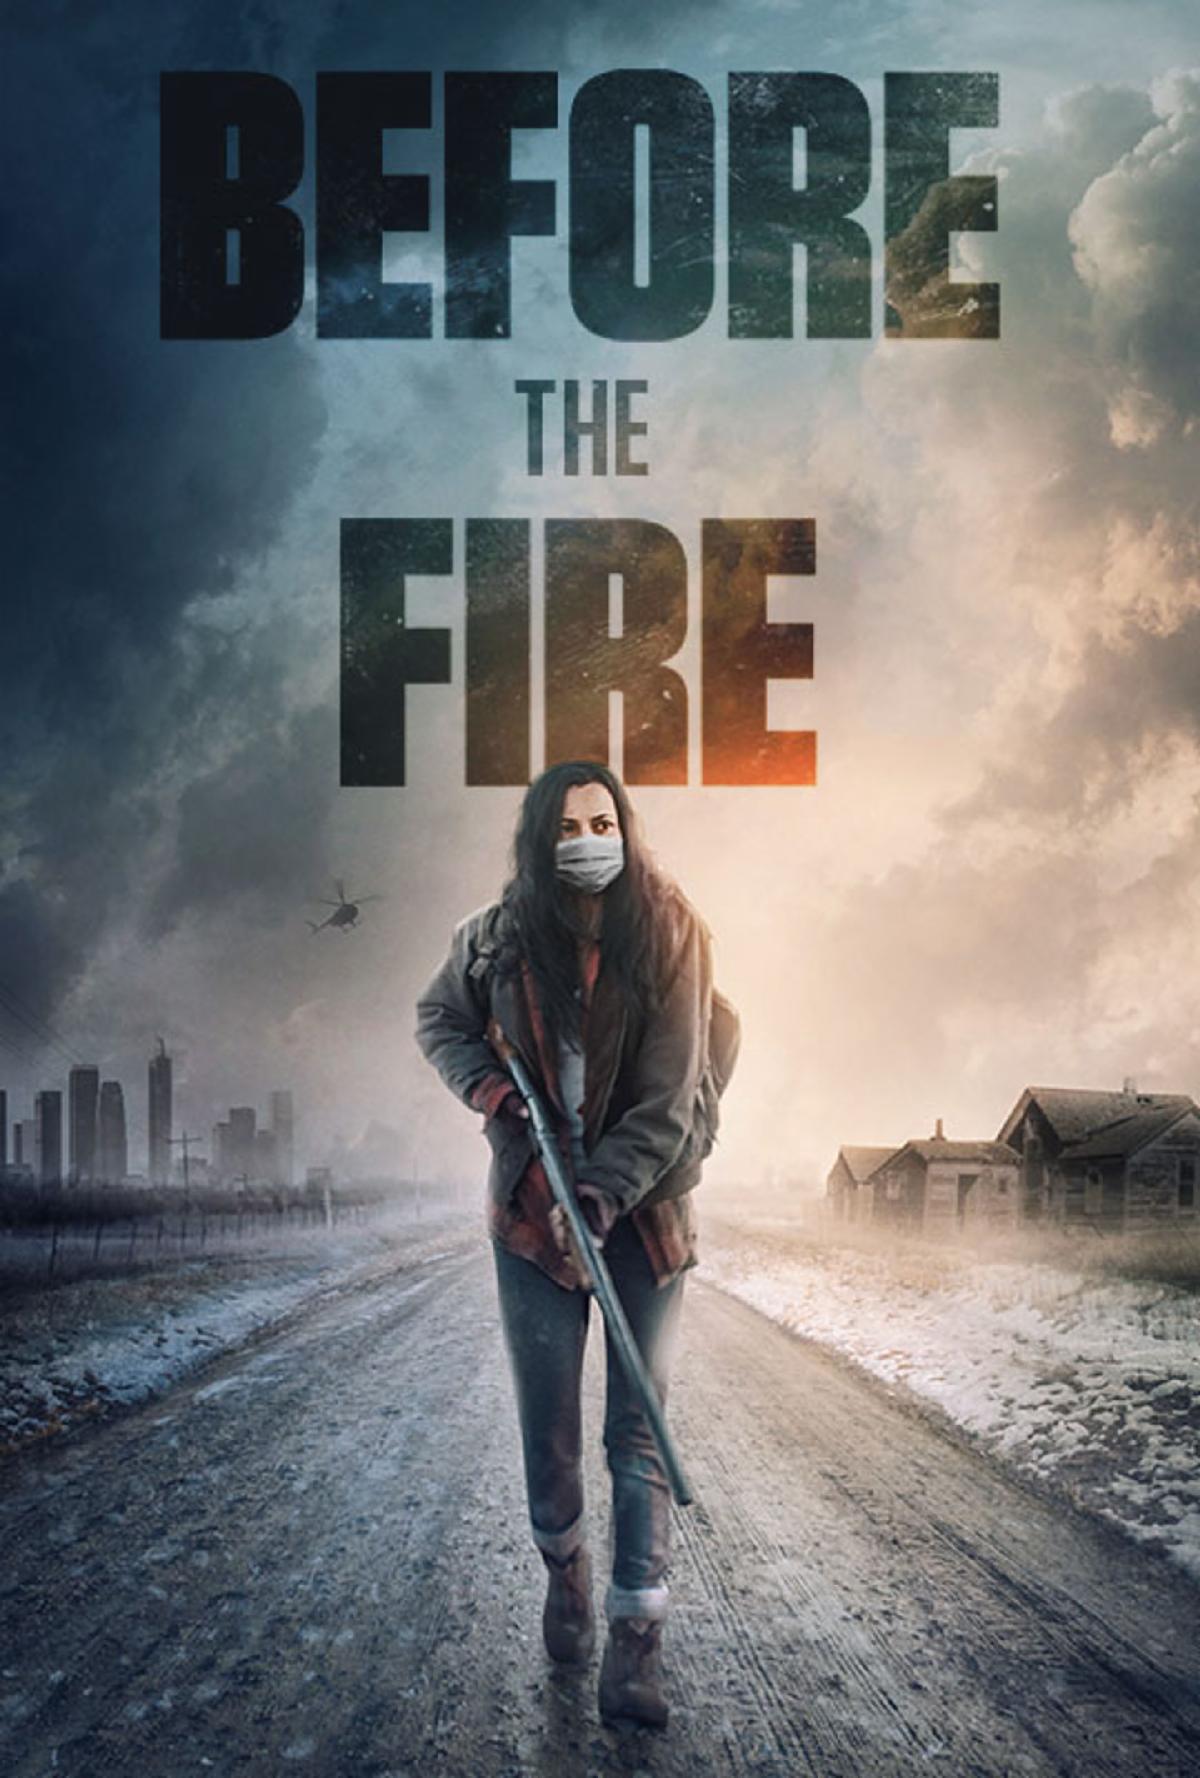 [News] BEFORE THE FIRE Arriving on Digital & VOD on August 14